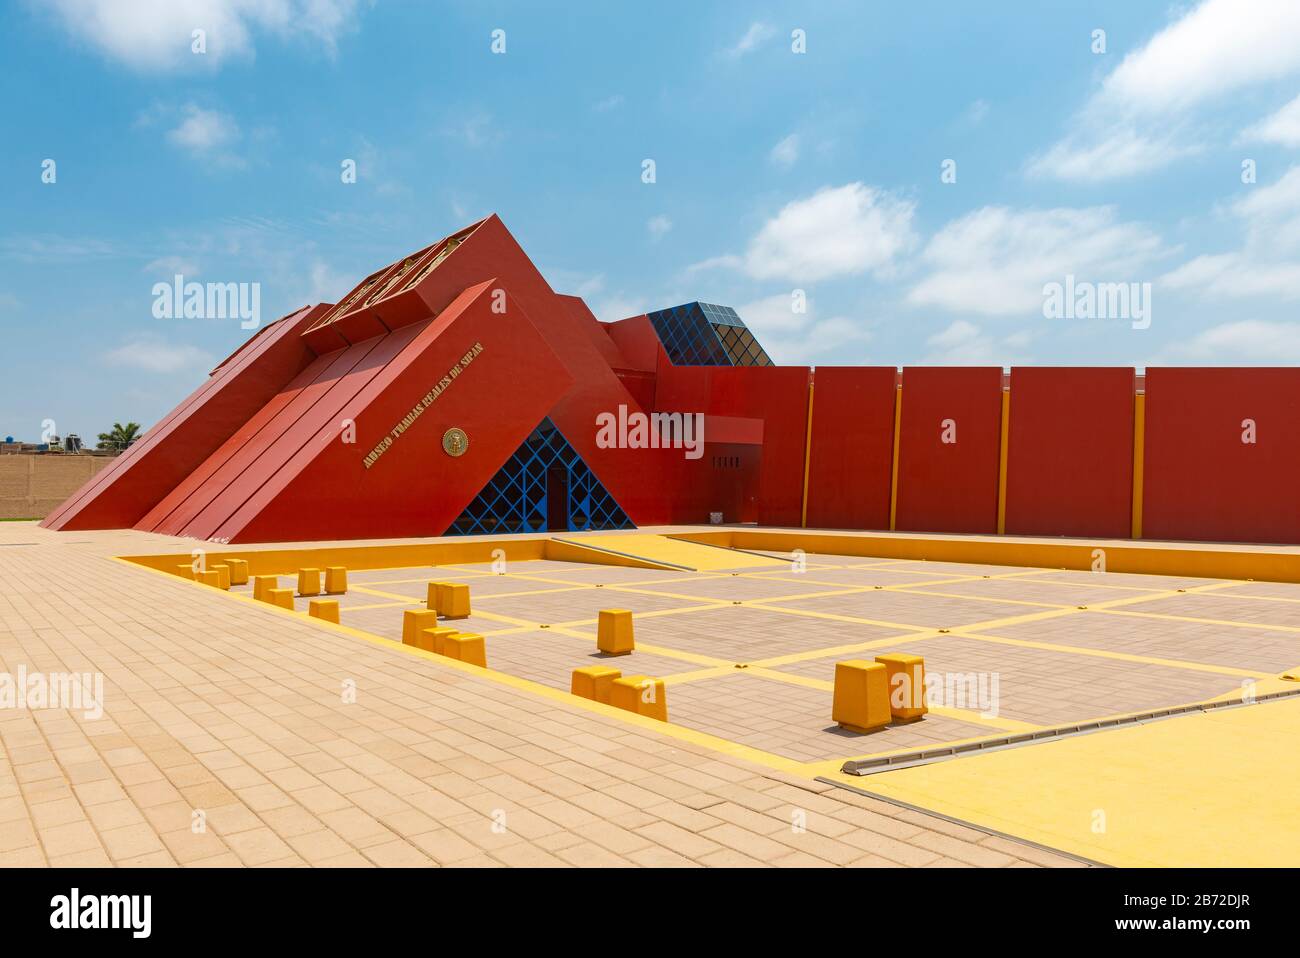 Facade of the Sipan Lord royal tombs museum in modern architecture style in Lambayeque city between Trujillo and Chiclayo, Peru. Stock Photo